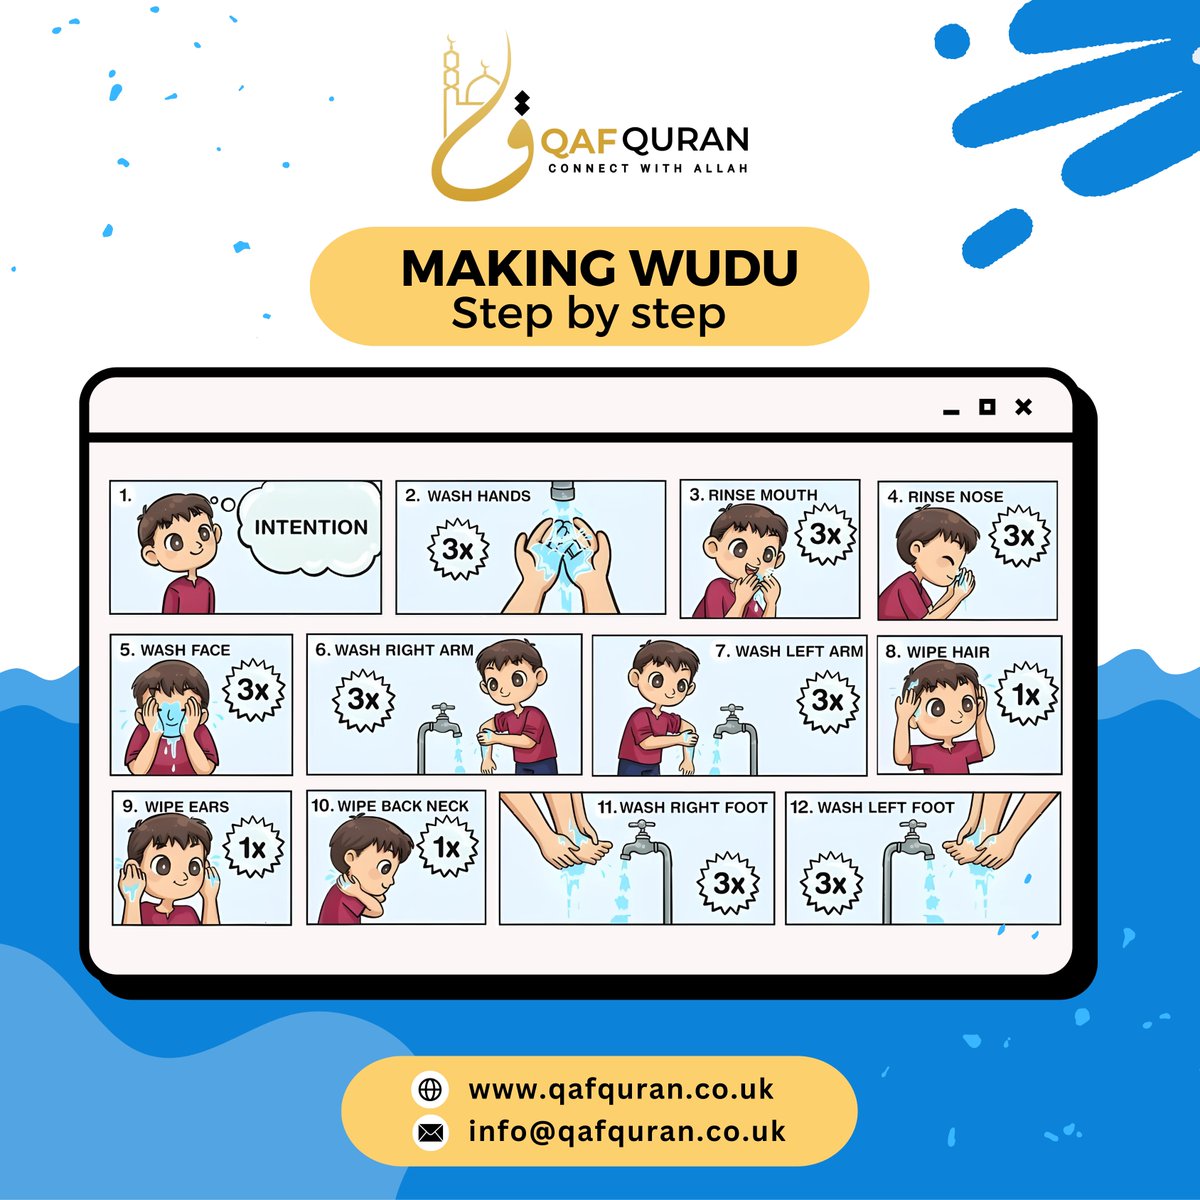 'Starting your day with a clean heart and pure intention! Learn the step-by-step guide to performing Wudu (ablution), a fundamental practice in Islam that prepares us for prayer and spiritual growth.
- #Wudu
- #Ablution
- #IslamicPractices
- #MuslimLife
- #SpiritualCleansing